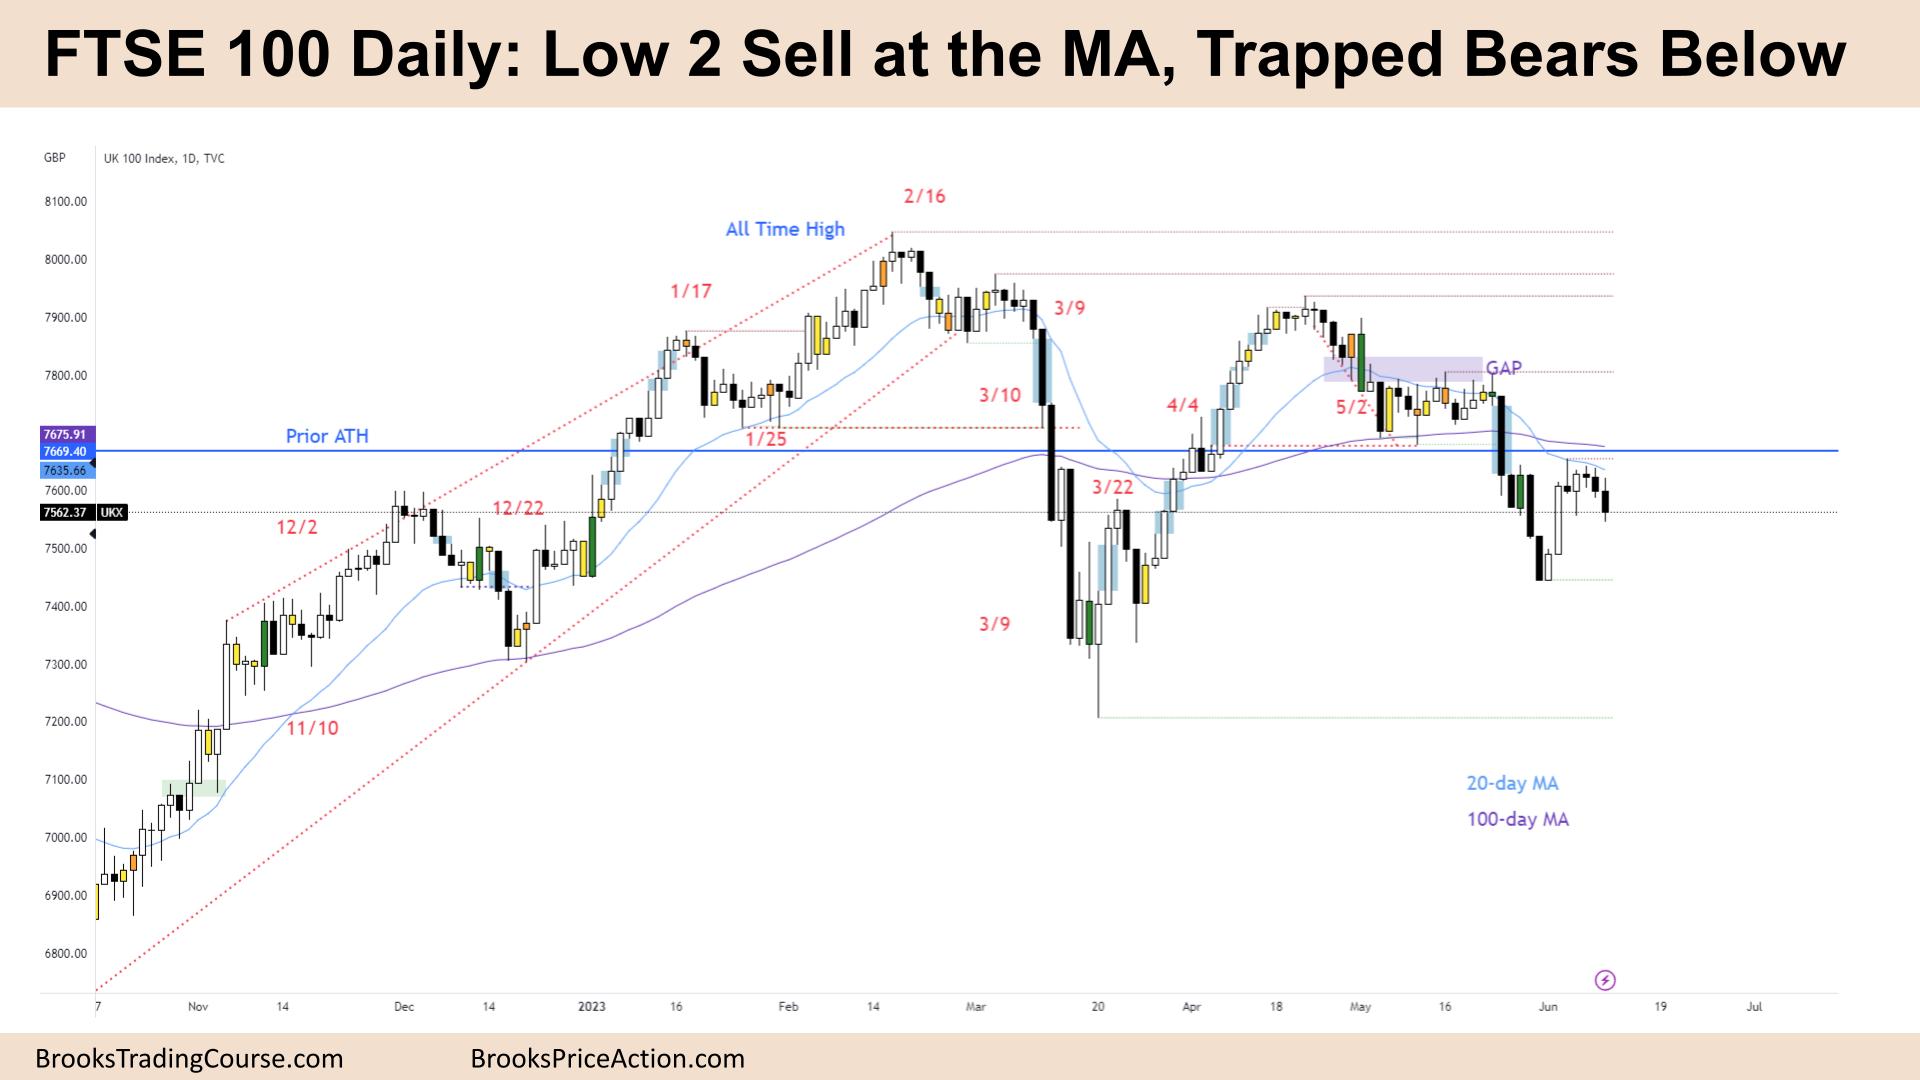 FTSE 100 Low 2 Sell at the MA Trapped Bears Below